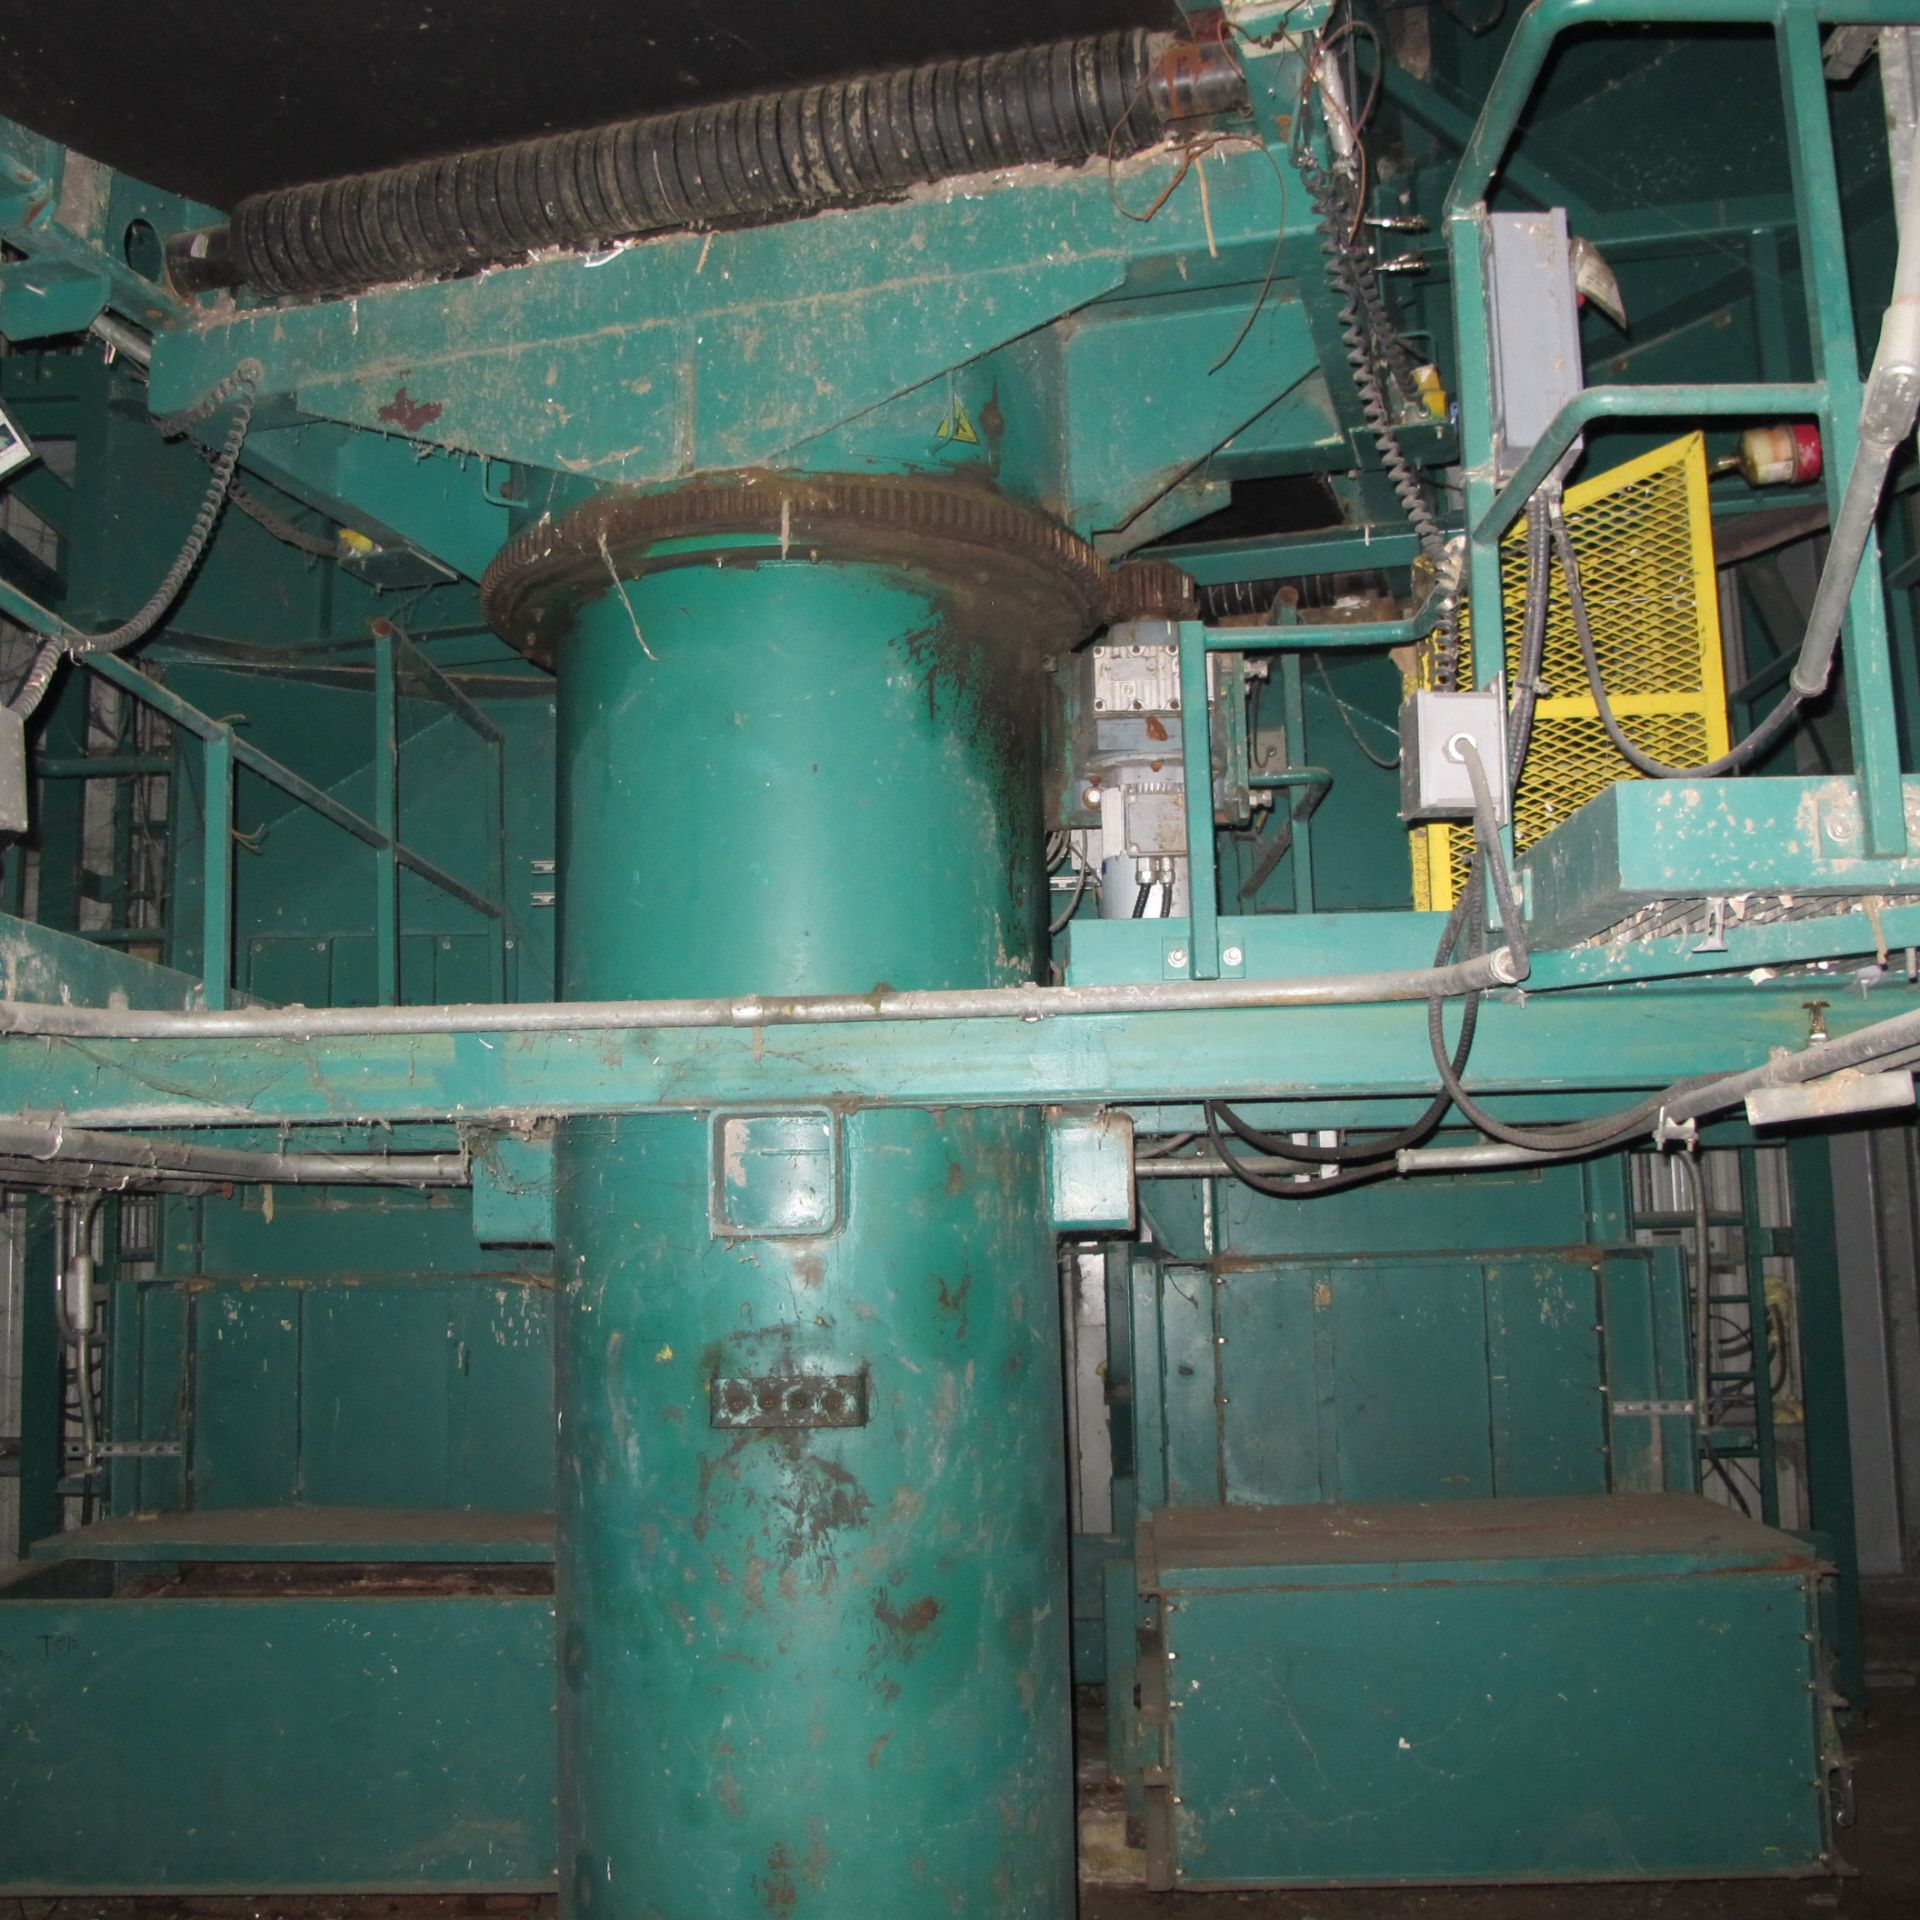 FMW PIVOTING CONVEYOR (FEEDING LINES A AND B) INCLUDING 2 EURODRIVES AND MOTORS